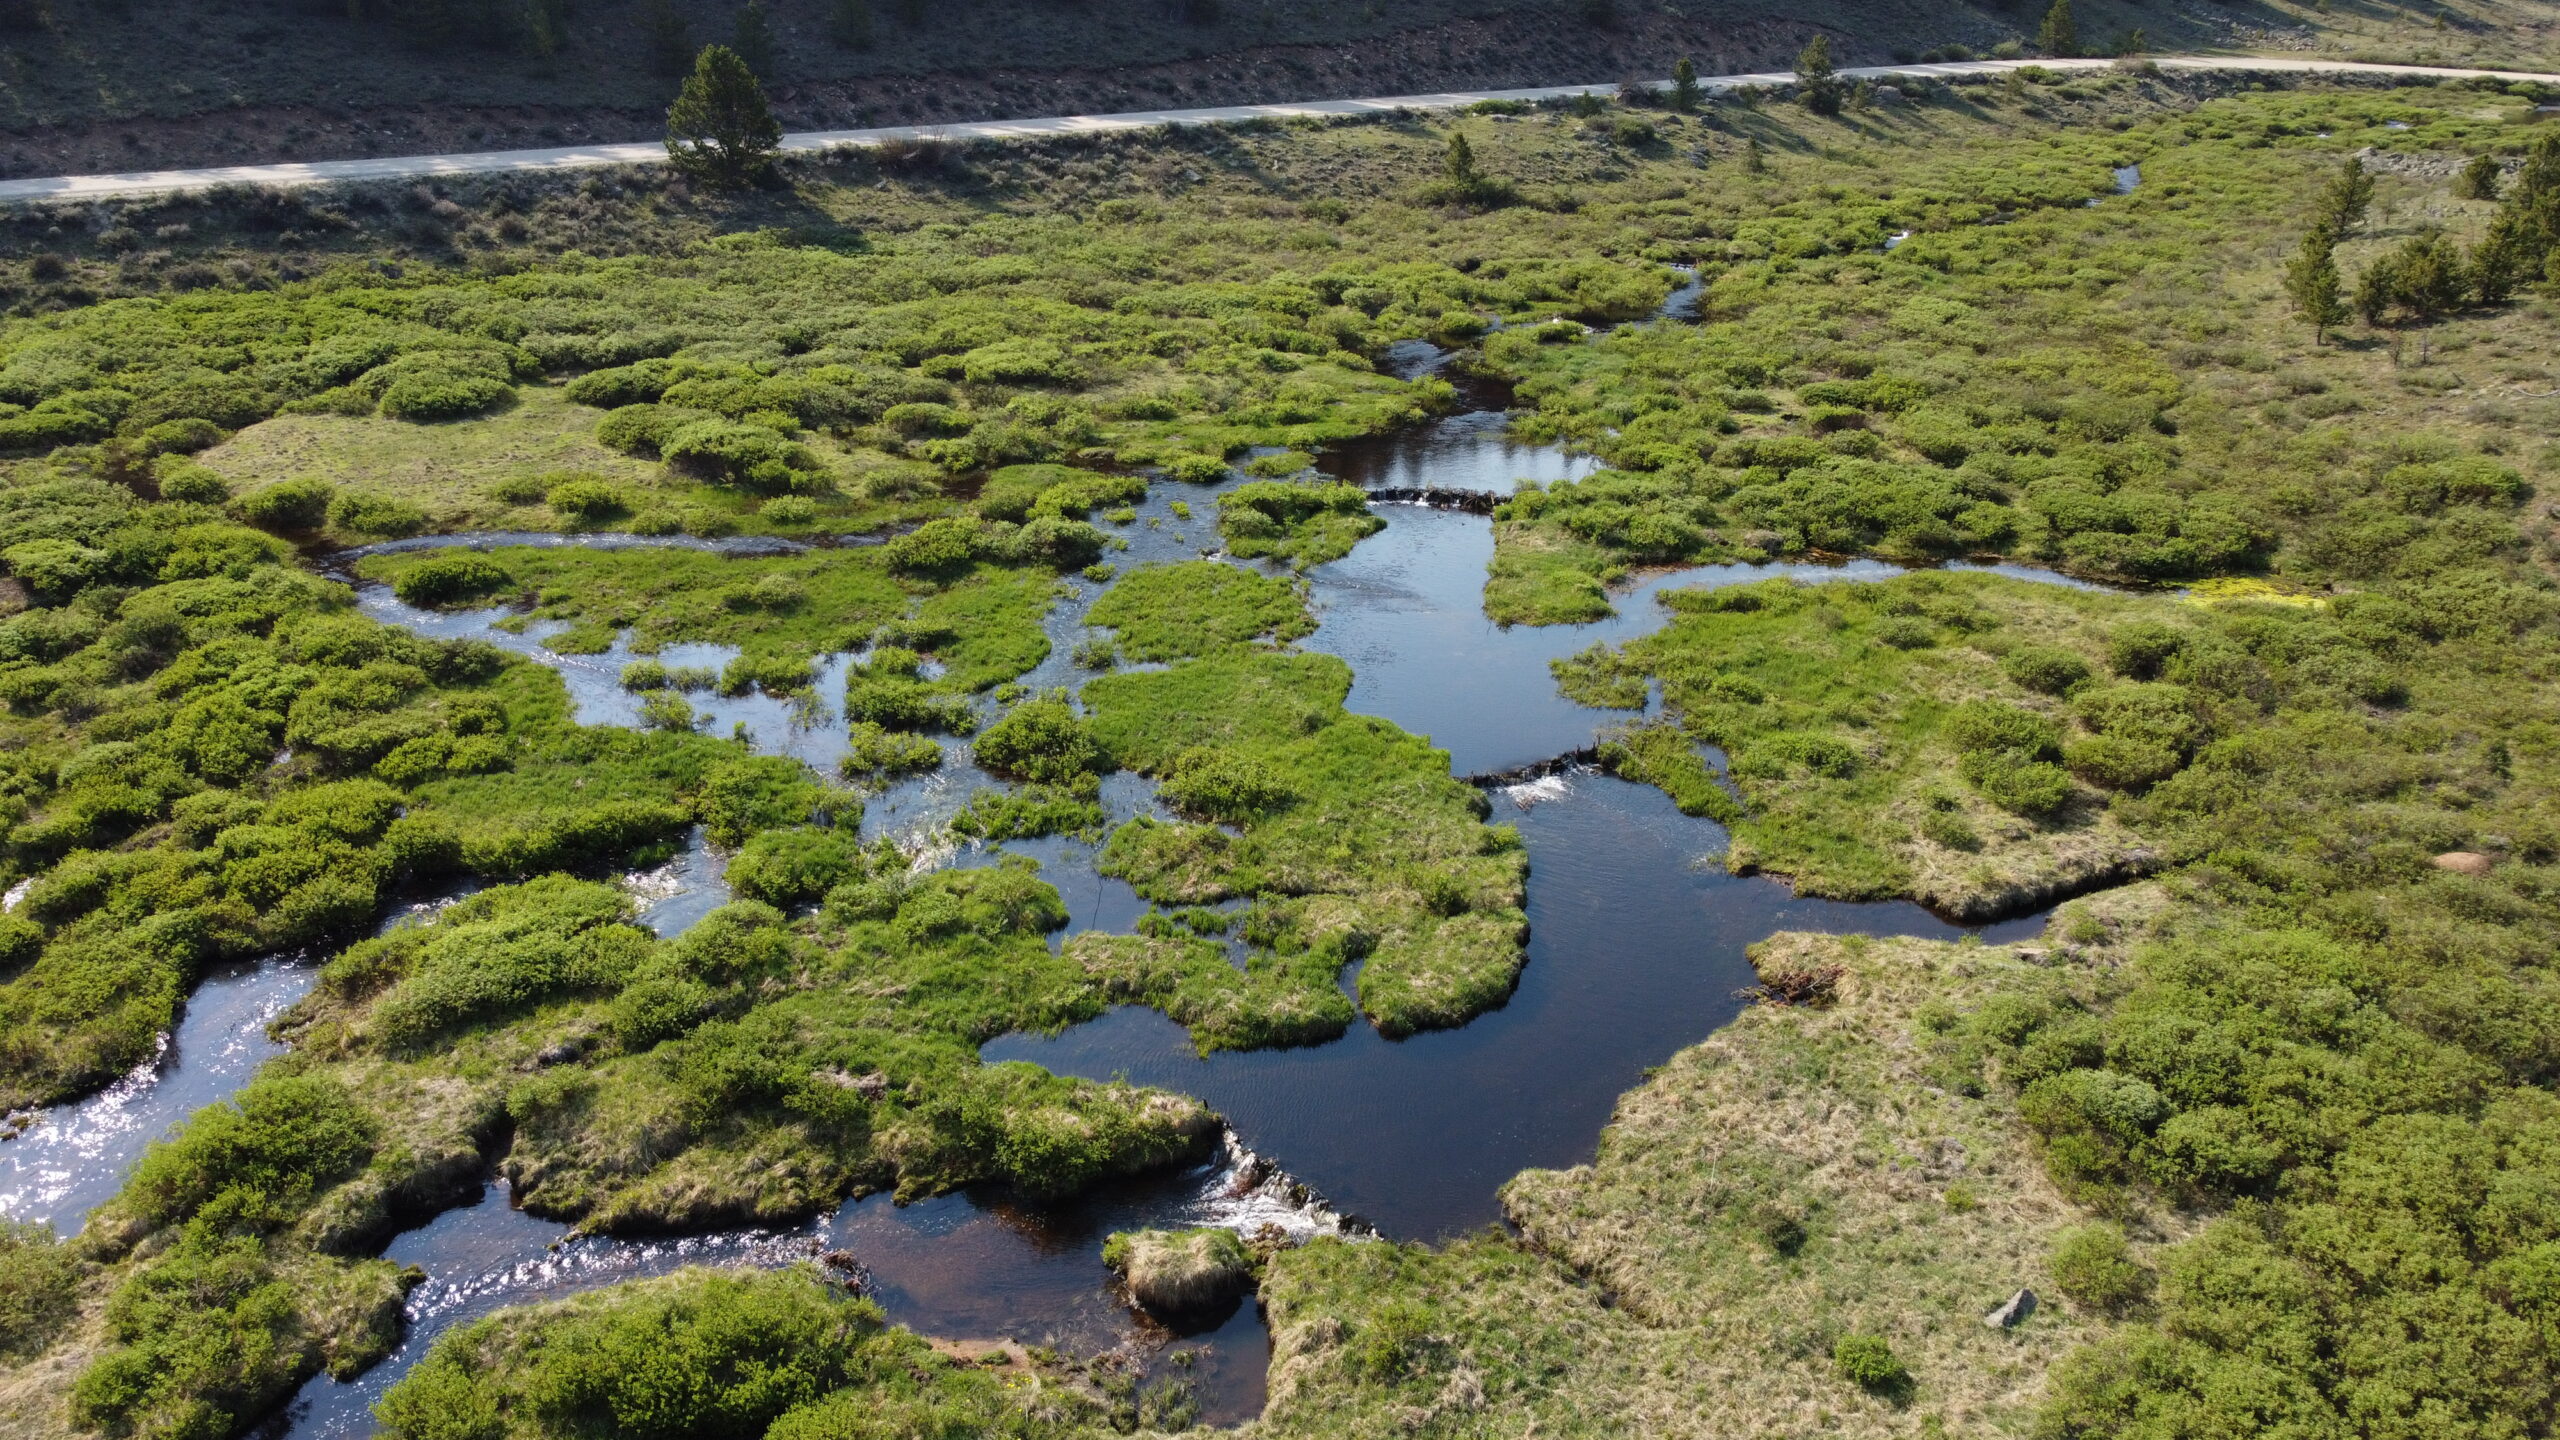 The Taylor Park Wetland Restoration Project is a long-term, collaborative effort to restore stream, riparian, and wetland habitat in the headwaters of the Gunnison River, located in the Gunnison National Forest. This beaver-based restoration project uses simple, structural additions to riverscapes that mimic natural processes (like beaver dams) to recover the ecological functions of riparian and wetland ecosystems. By reconnecting Trail Creek (a headwater stream within Taylor Park) with its floodplain and historic wetlands, the project can recharge the local aquifer, reduce storm flooding damage, increase biodiversity by improving habitat for fish and wildlife, efficiently store carbon in the soil, and decrease drought impacts. The project also promotes wildfire resilience by rewetting the soil, plants, and historic wetlands. Project partners include the National Forest Foundation, Gunnison National Forest, High Country Conservation Advocates, and others.